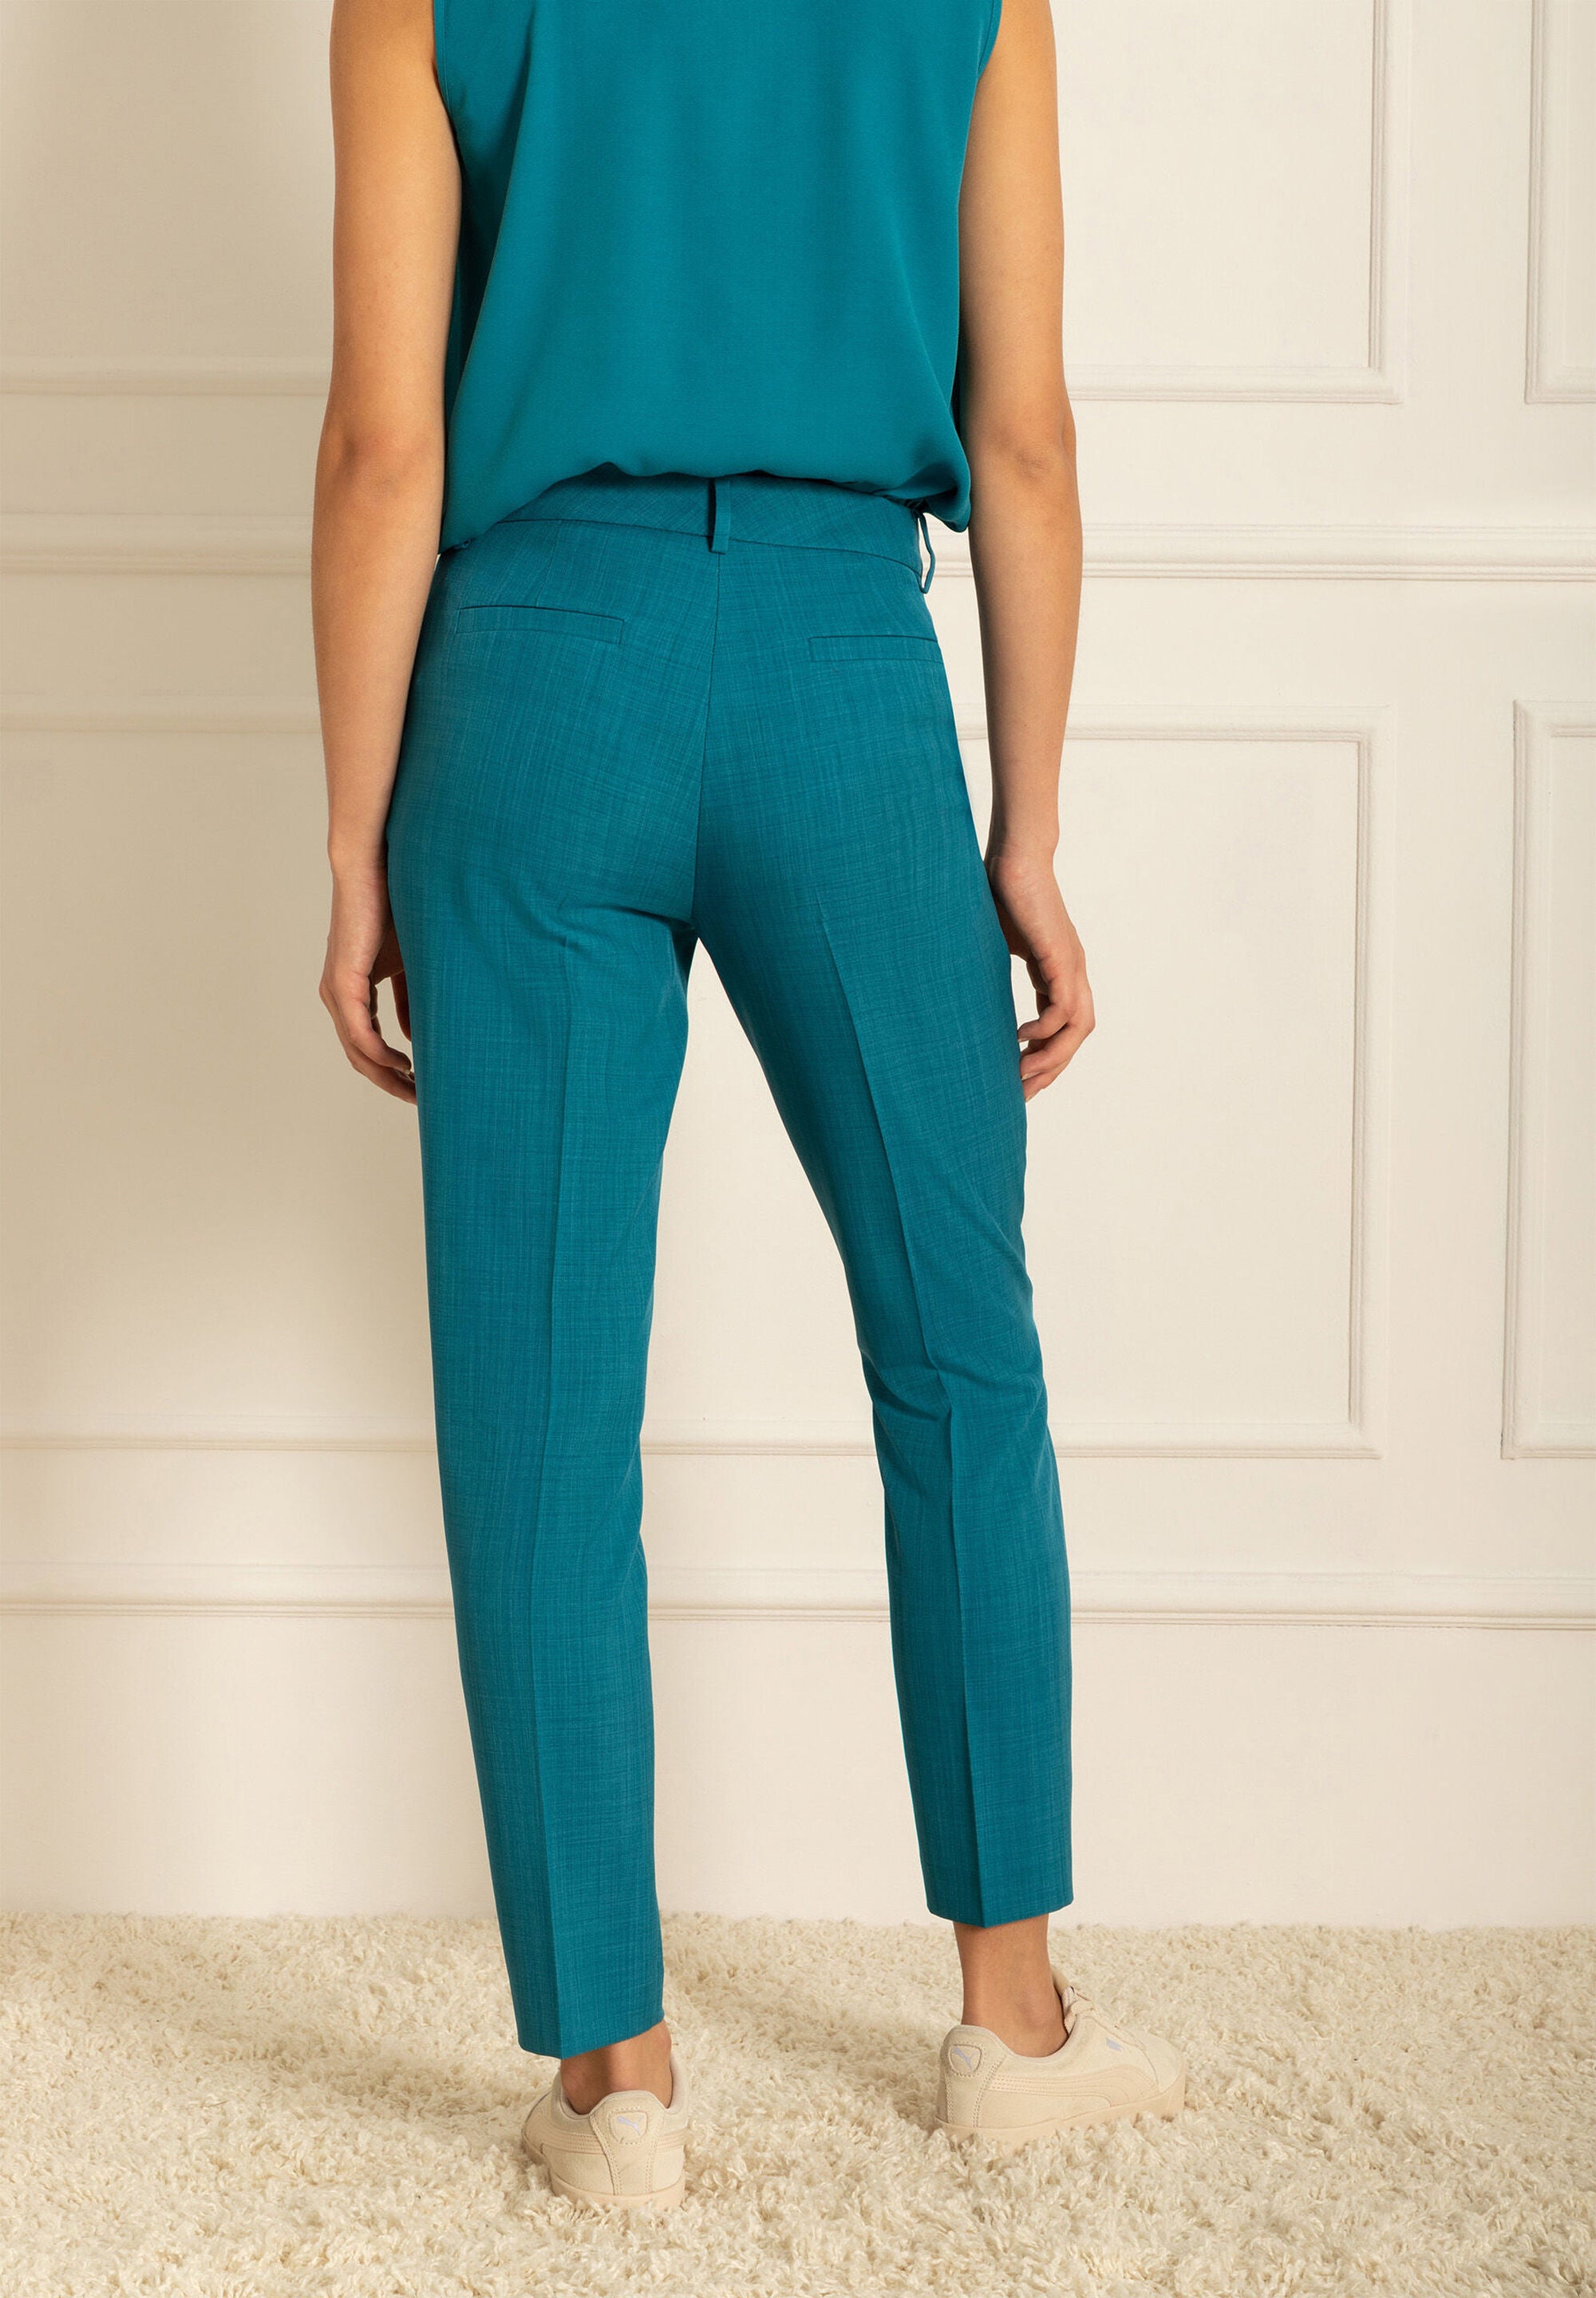 Blue Cropped Dress Trousers_03